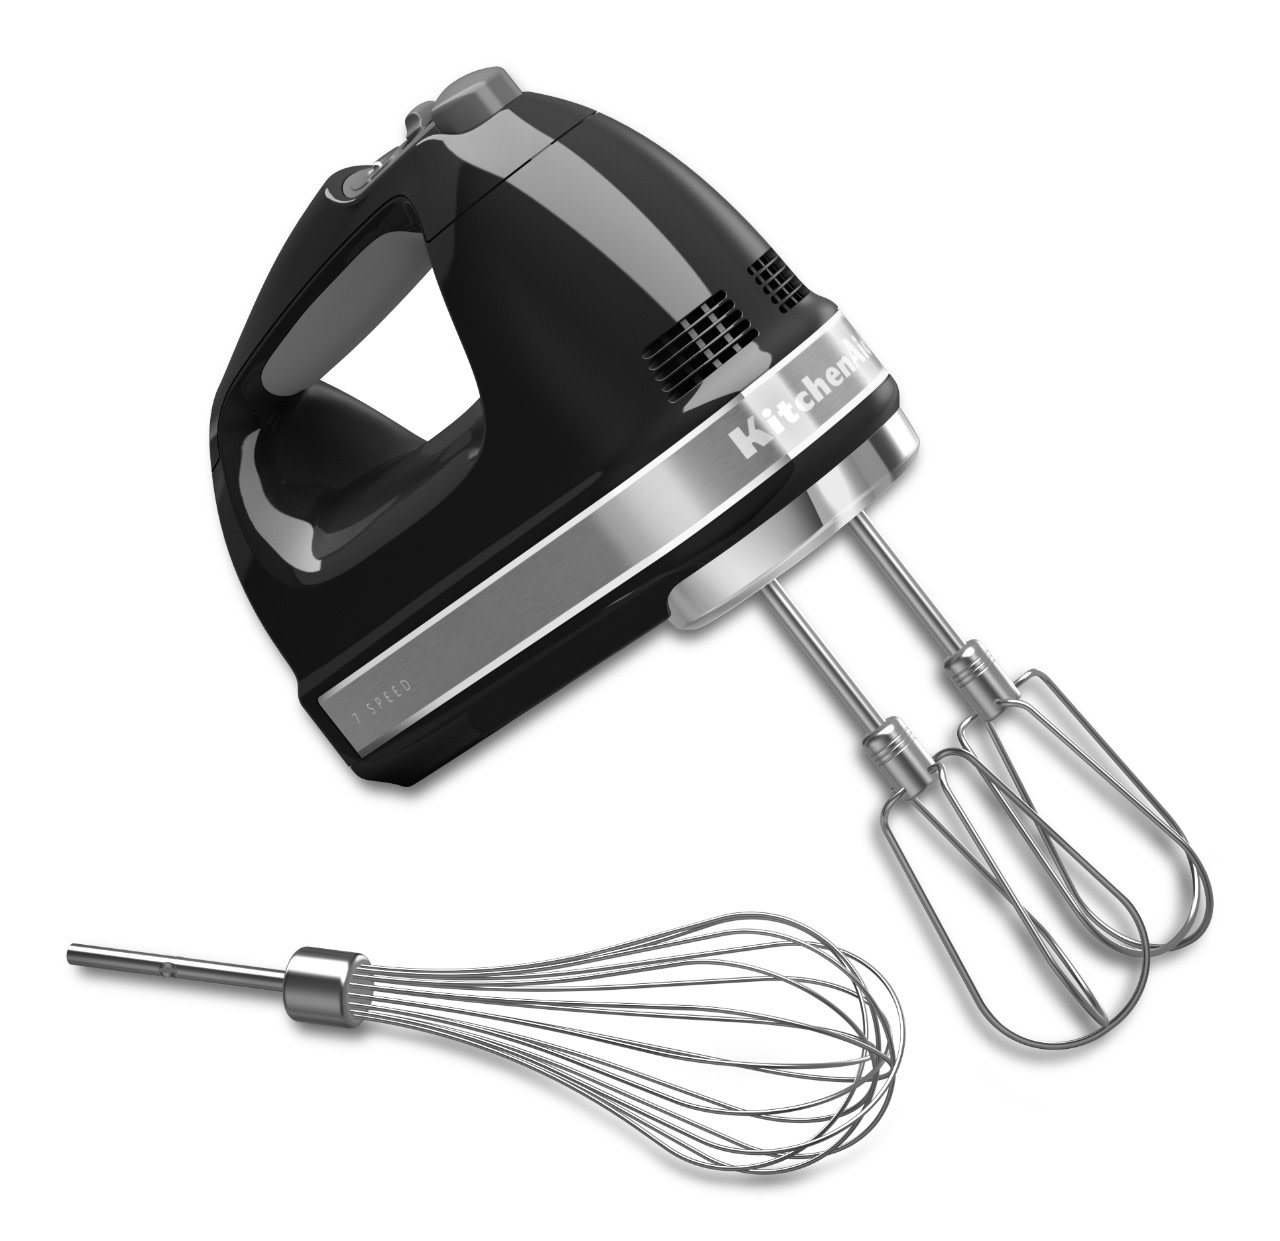  Kitchen Aid Hand Mixer 7 Speed Electric Hand Mixer, Household Handheld  Electric Egg Beater with Rods for Eggs Beating Dough Kneading, Egg Beater  for Whisking Egg Whites,Creaming Ingredients Household : Everything